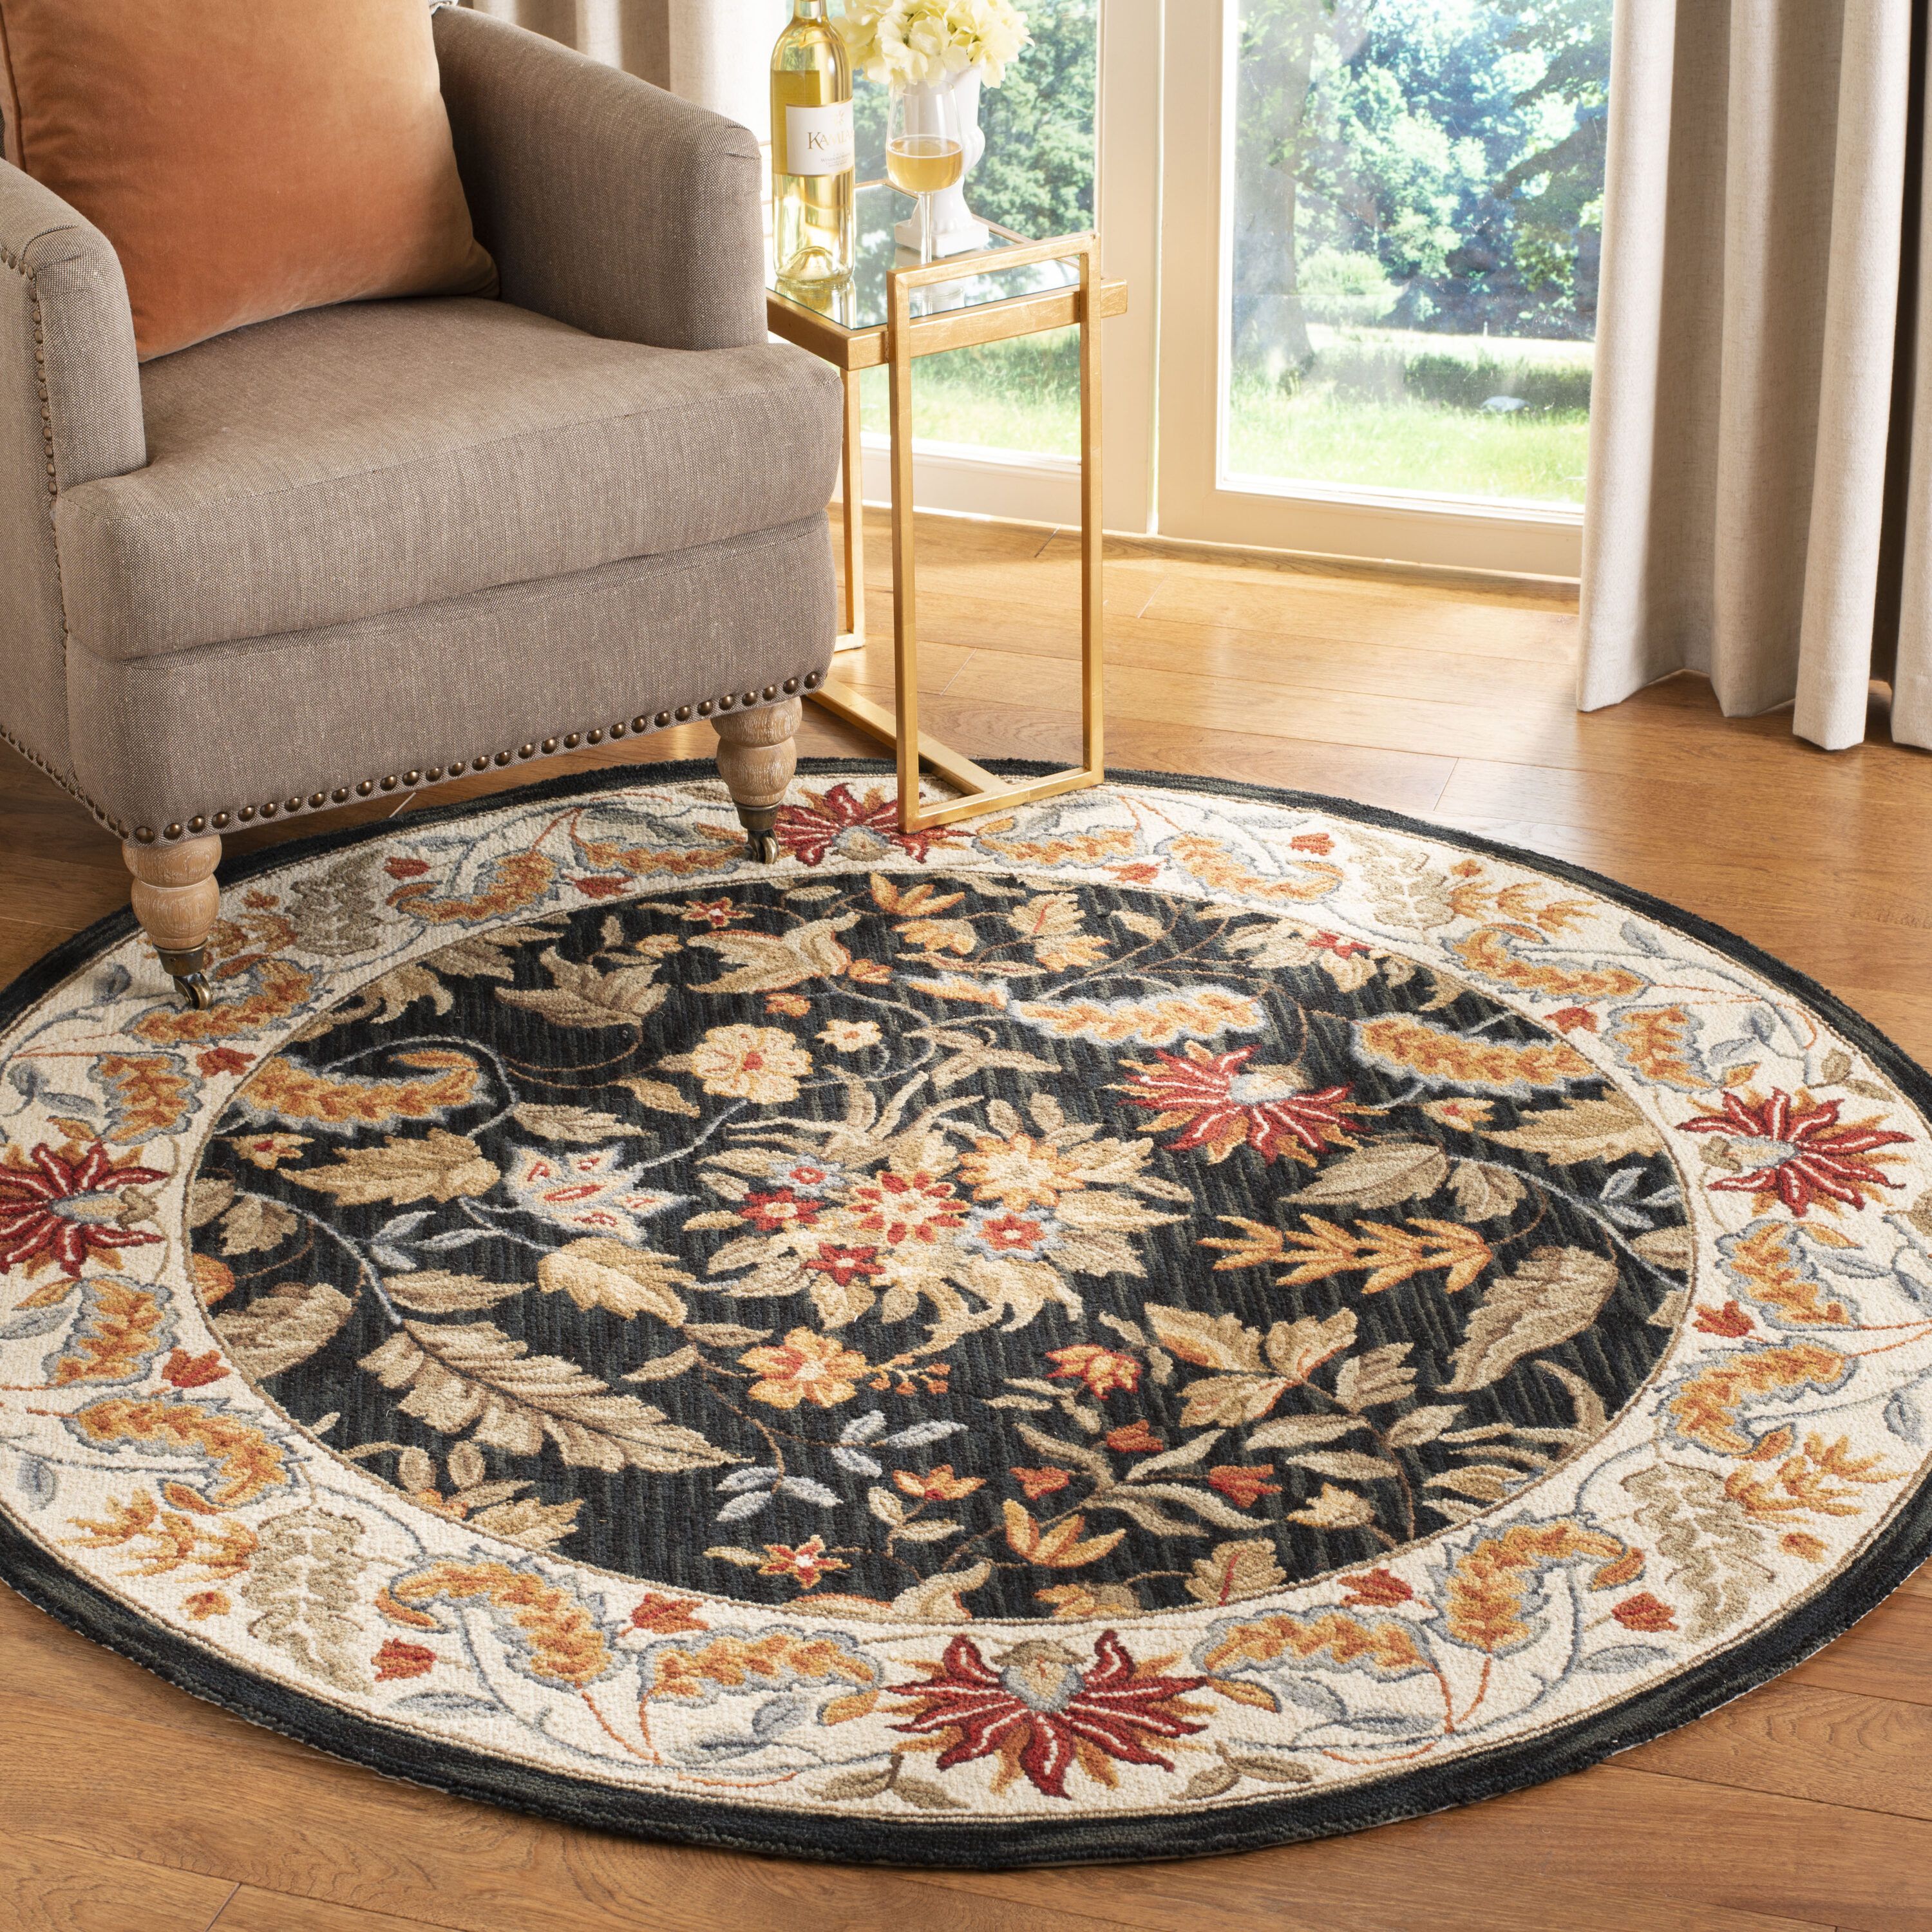 Safavieh 8 X 10 Wool Black Oval Indoor Floral/botanical Farmhouse/cottage  Area Rug In The Rugs Department At Lowes In Botanical Oval Rugs (View 6 of 15)